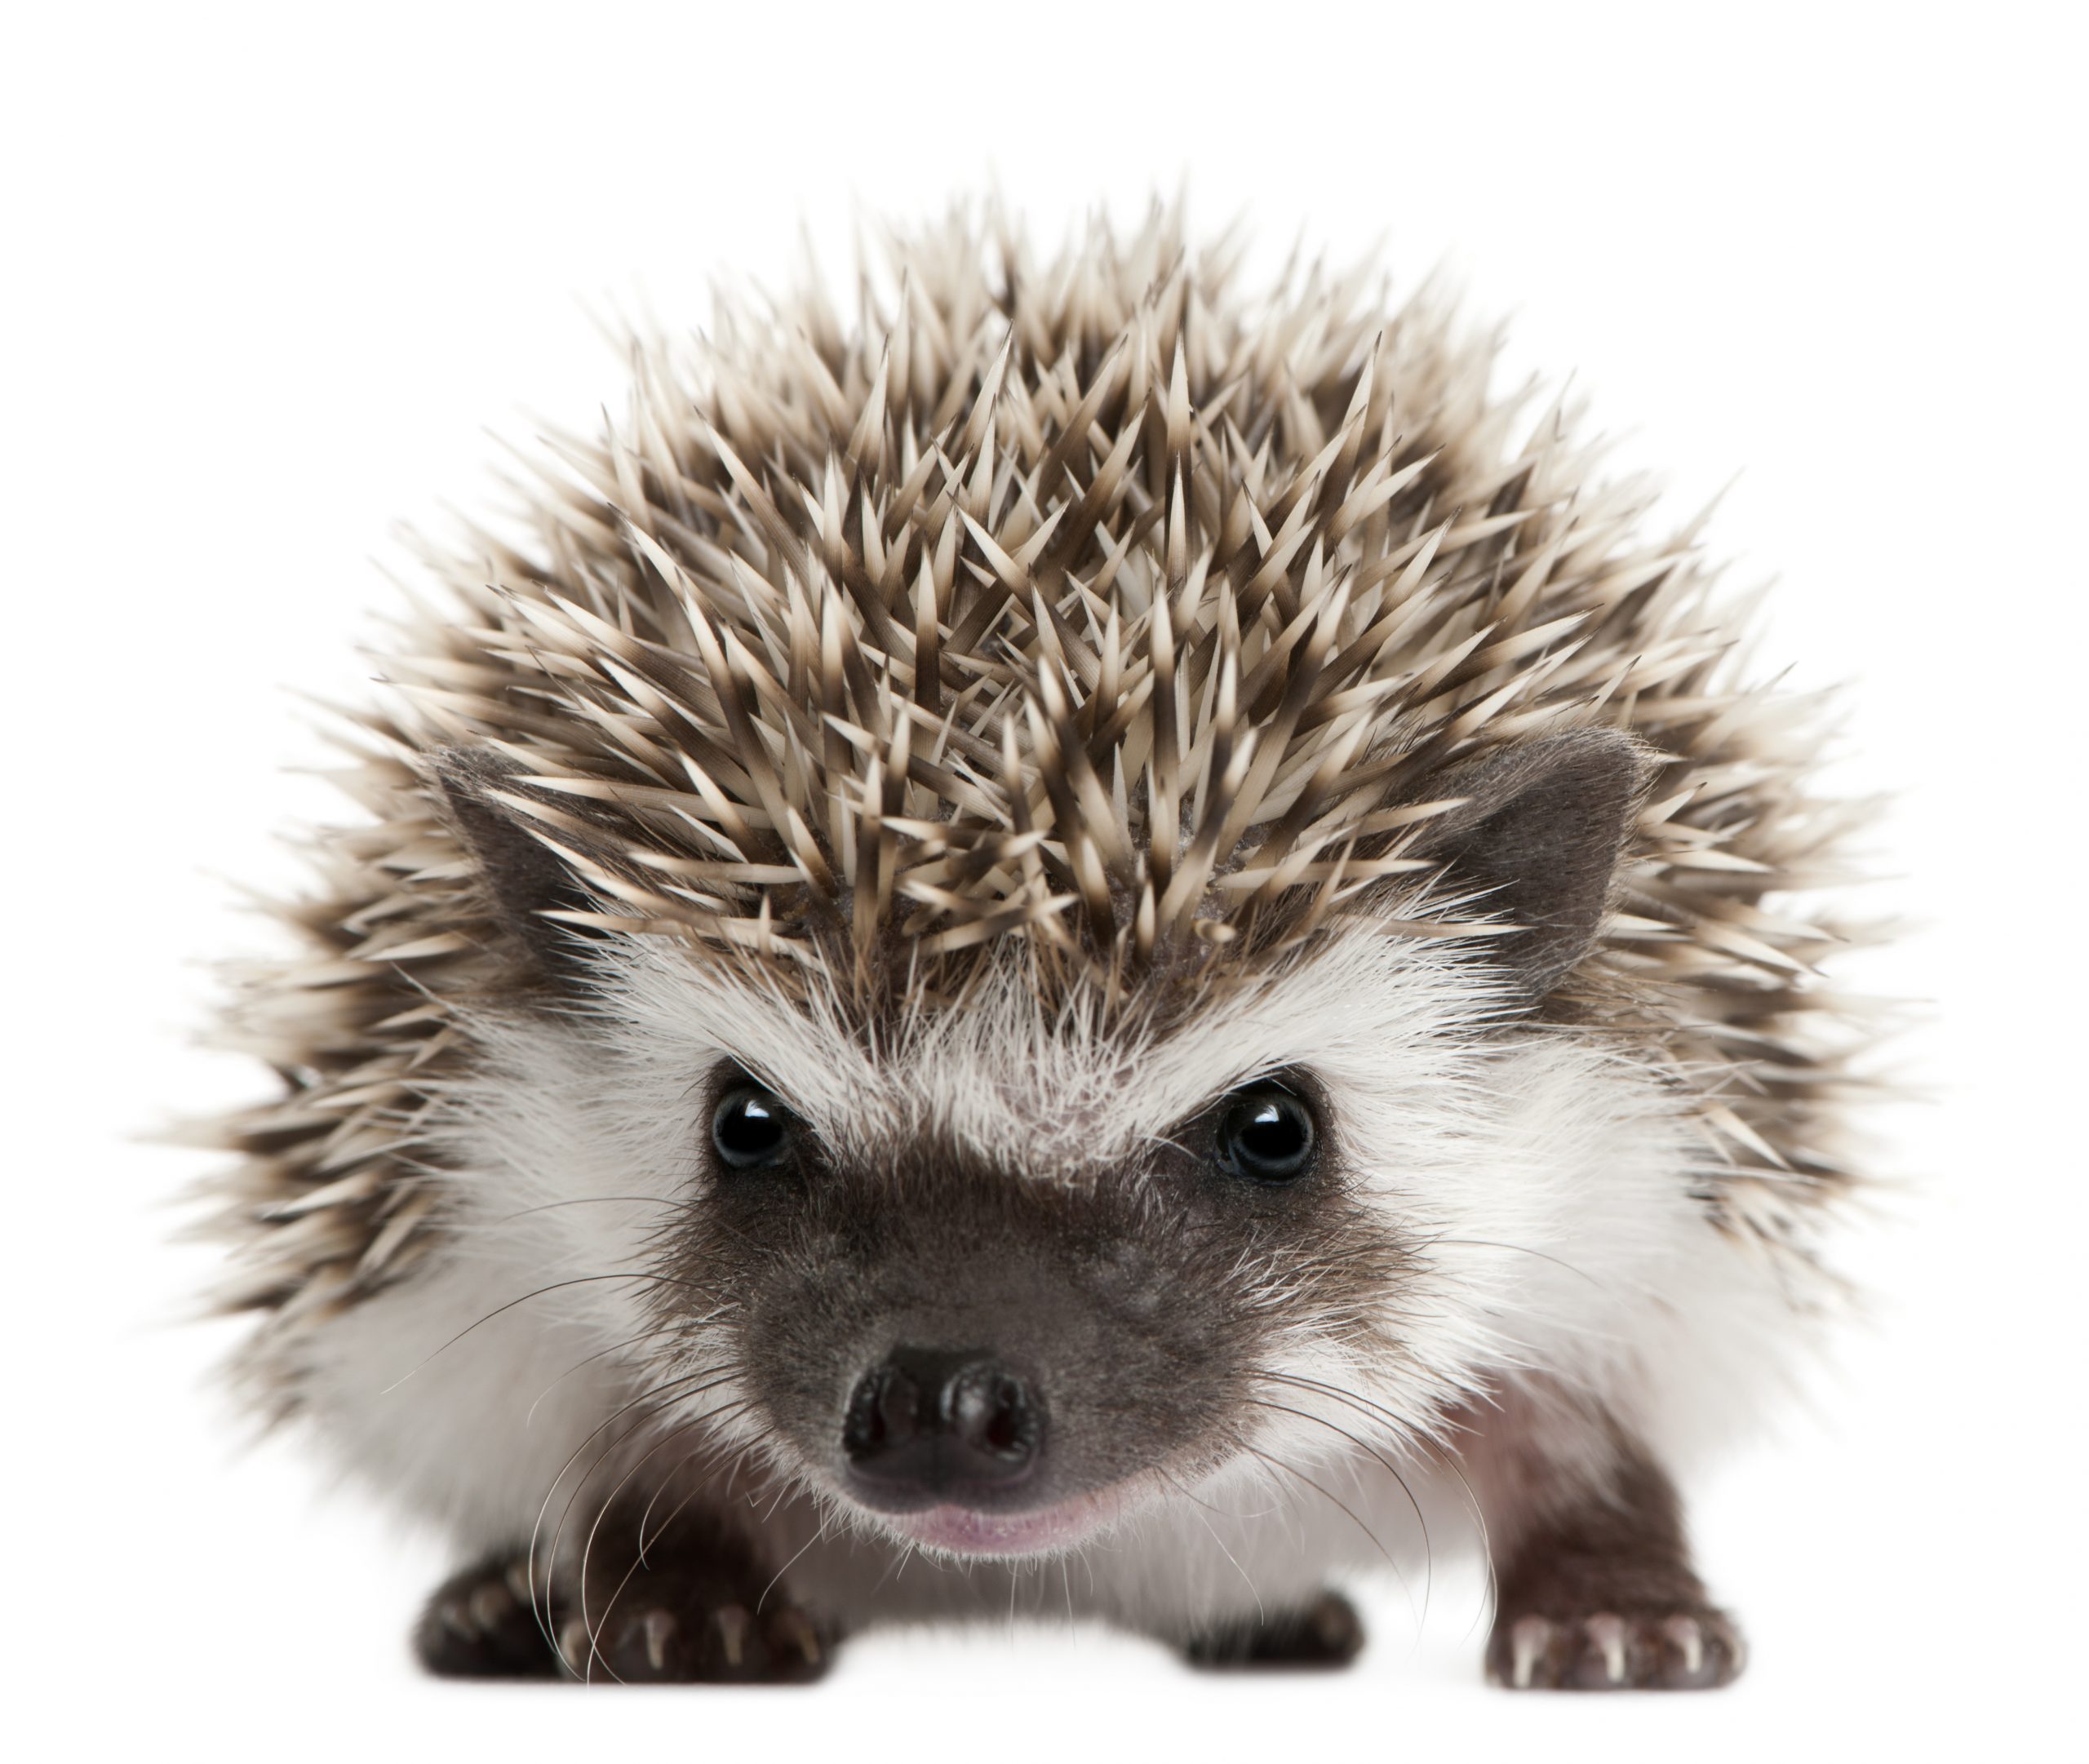 Four-toed Hedgehog, Atelerix albiventris, 3 weeks old, in front of white background